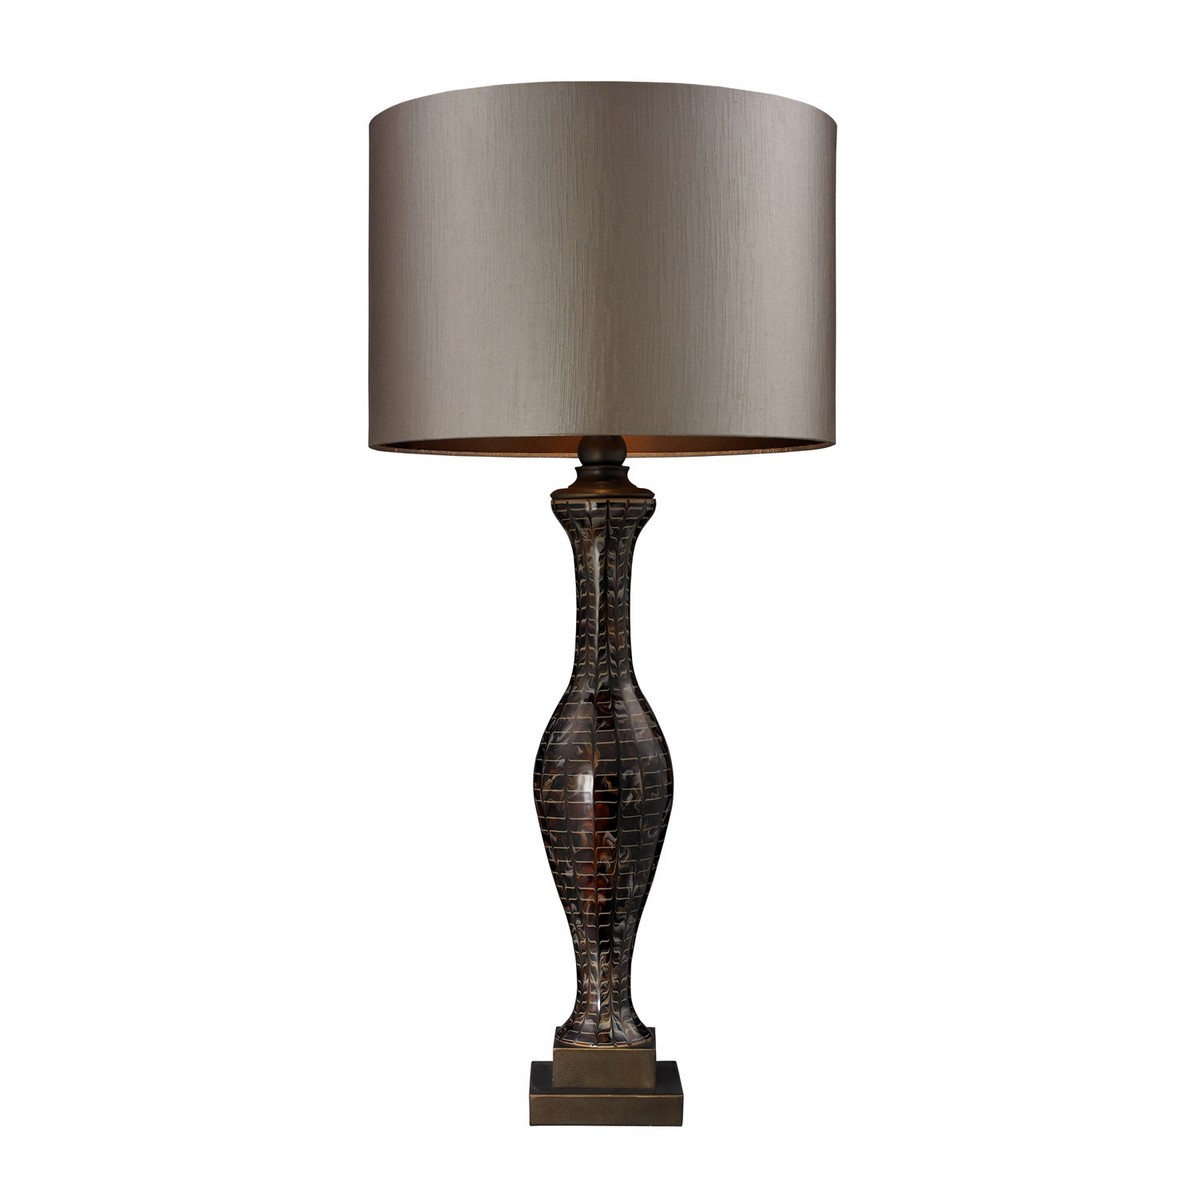 Elk Lighting D130 Table Lamp - Hand Painted Glass with Williams Bronze Metal Work